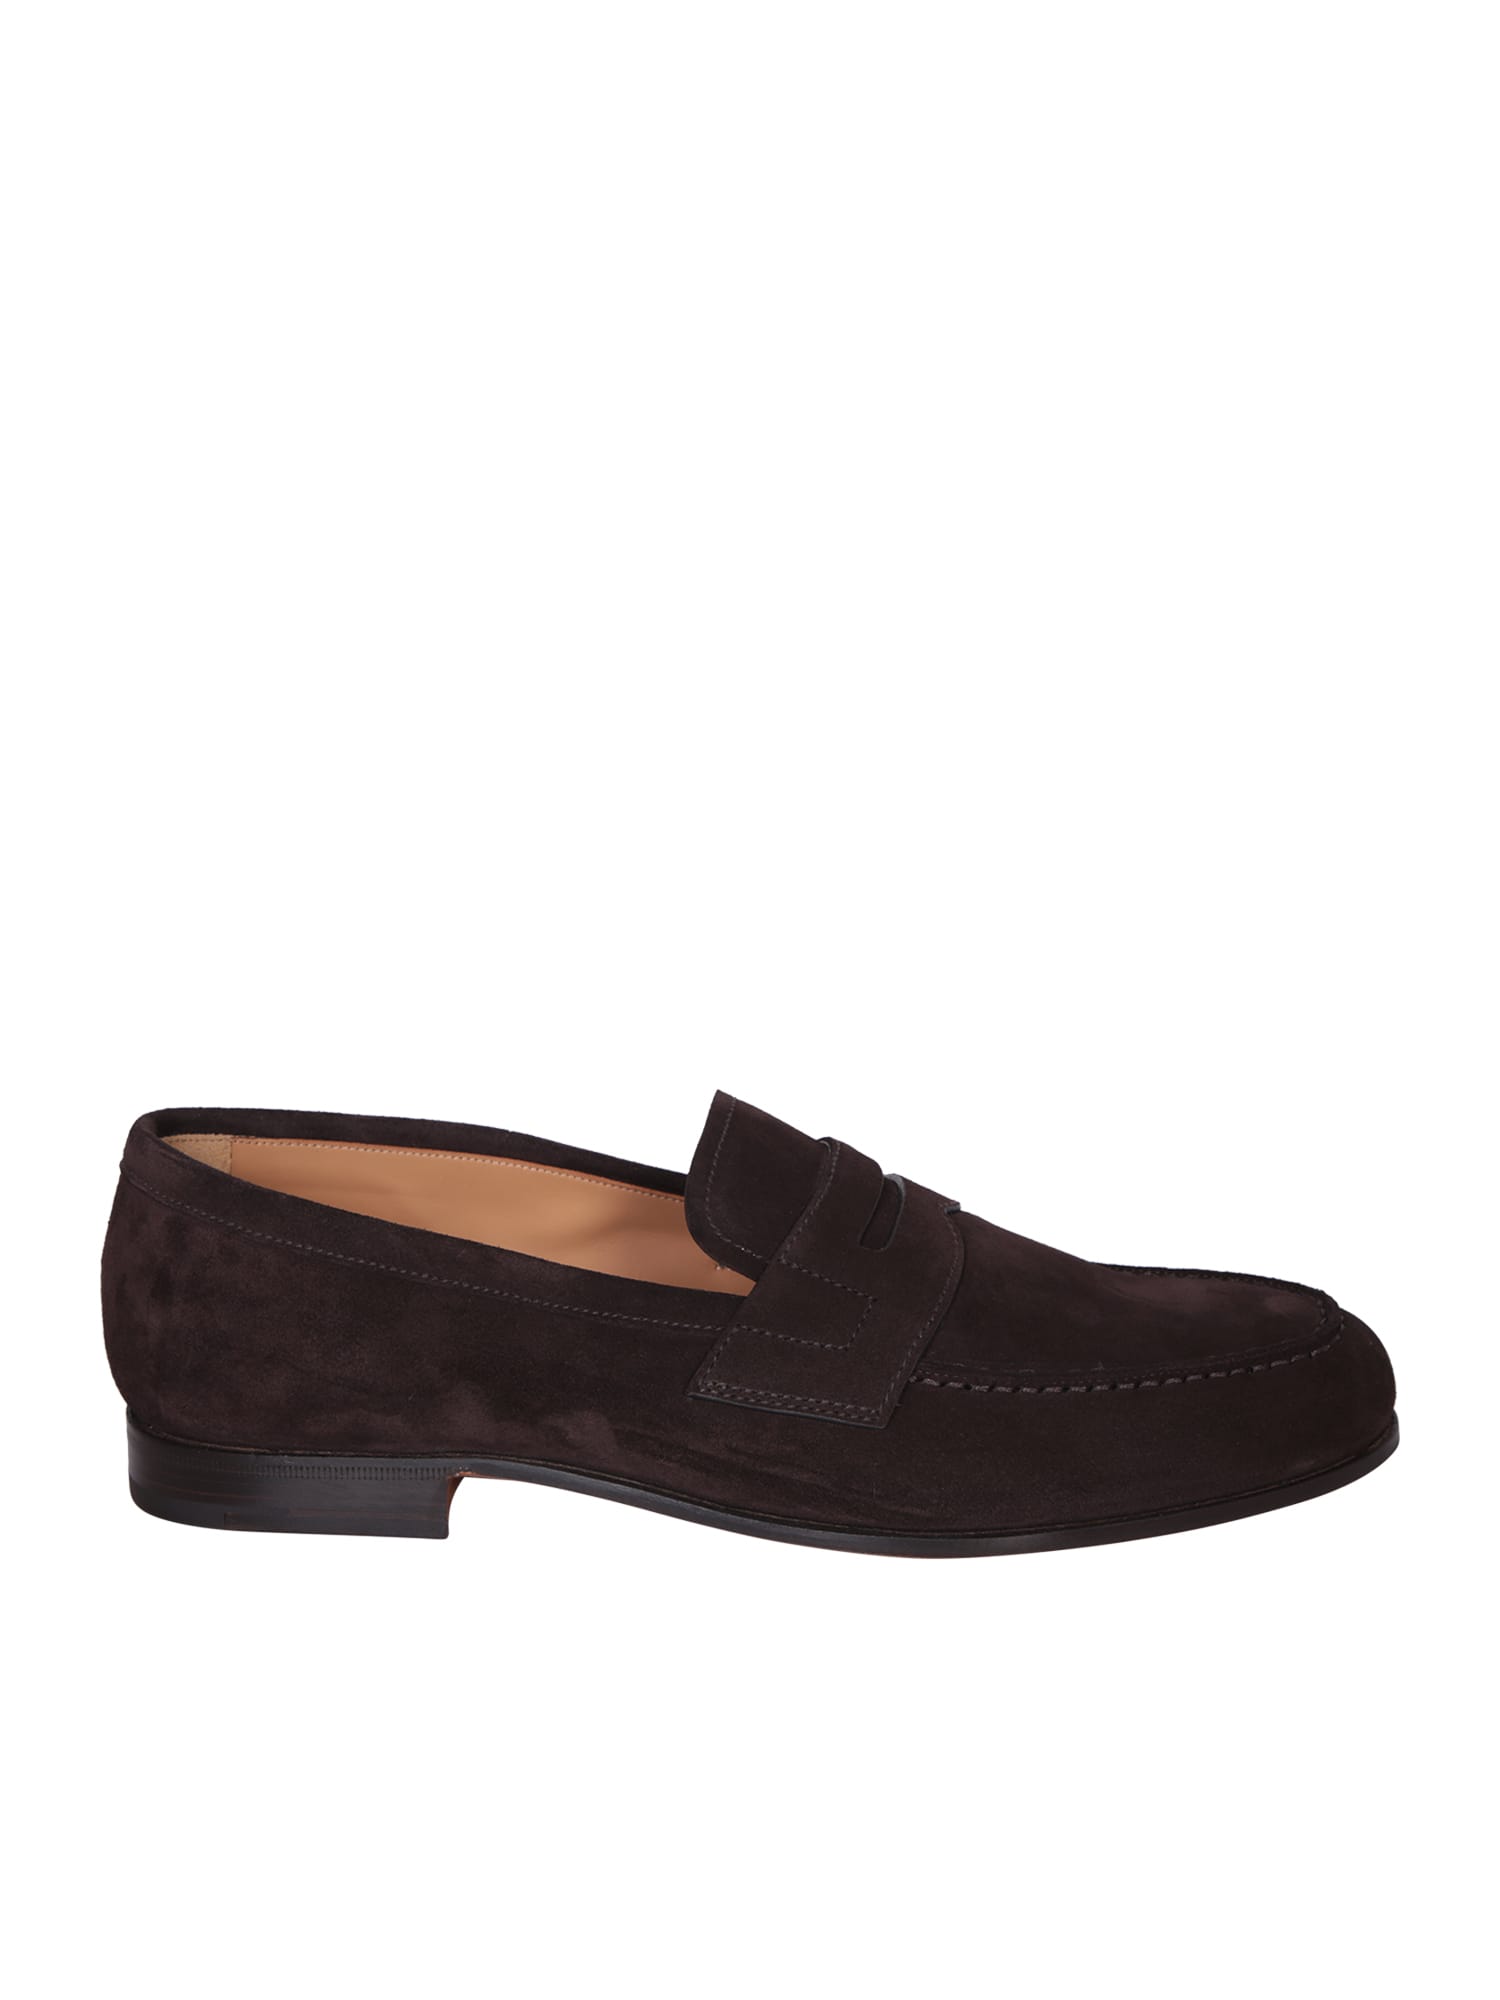 Church's Haswall 2 Brown Loafer